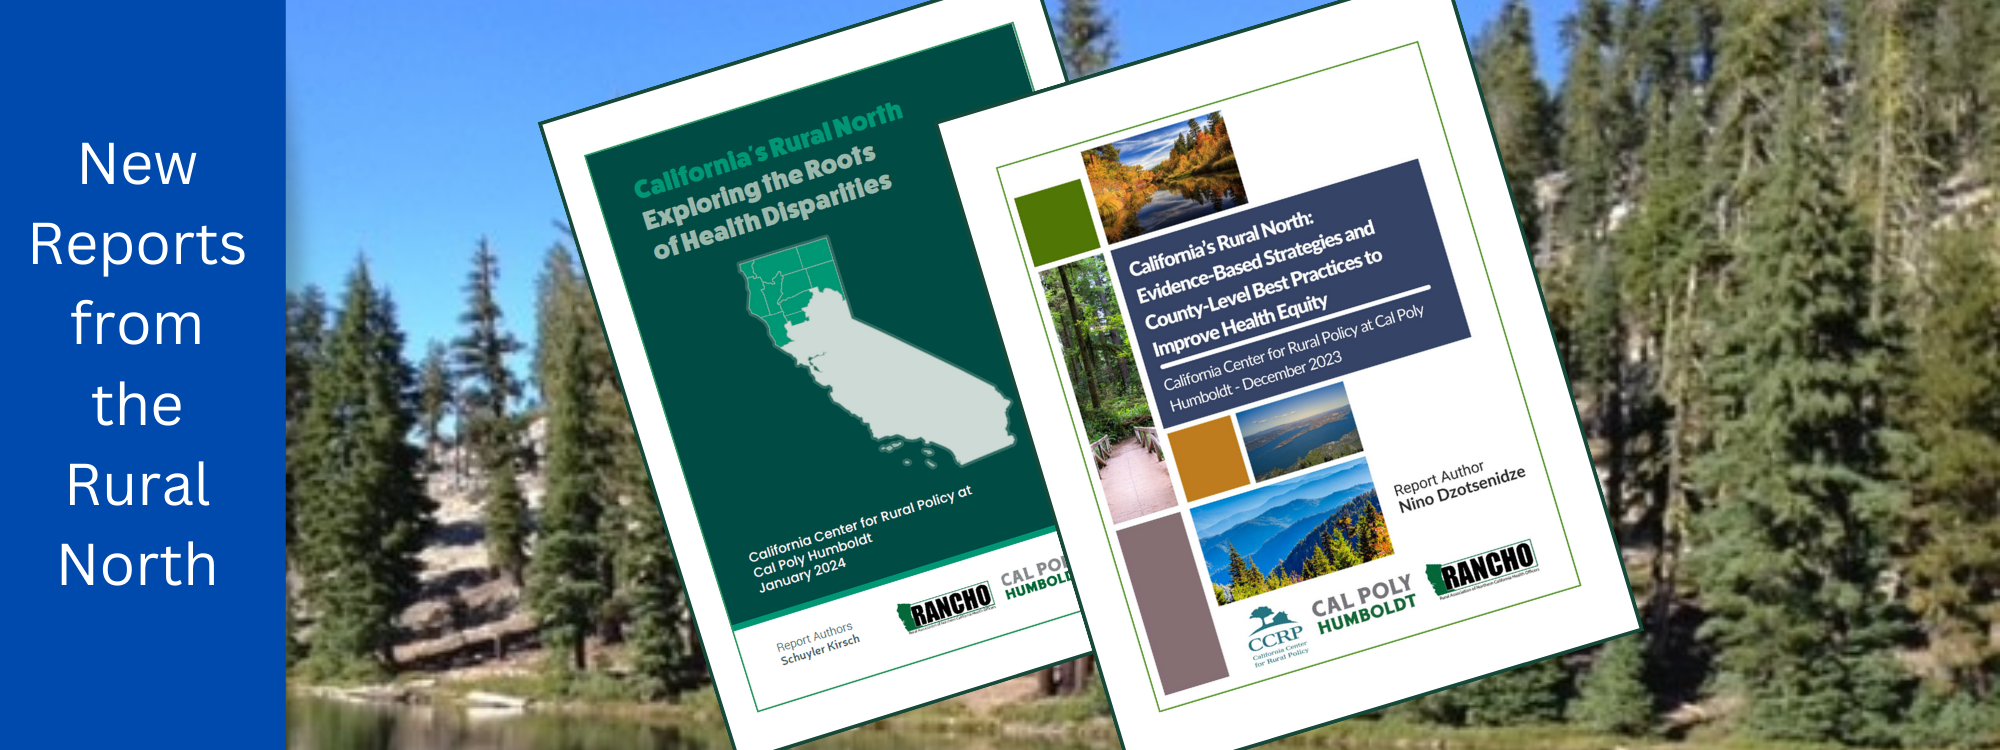 Two new reports from the California Center for Rural Policy: Exploring the Roots of Health Disparities and Evidence-Based Strategies and County-Level Best Practices to Improve Health Equity